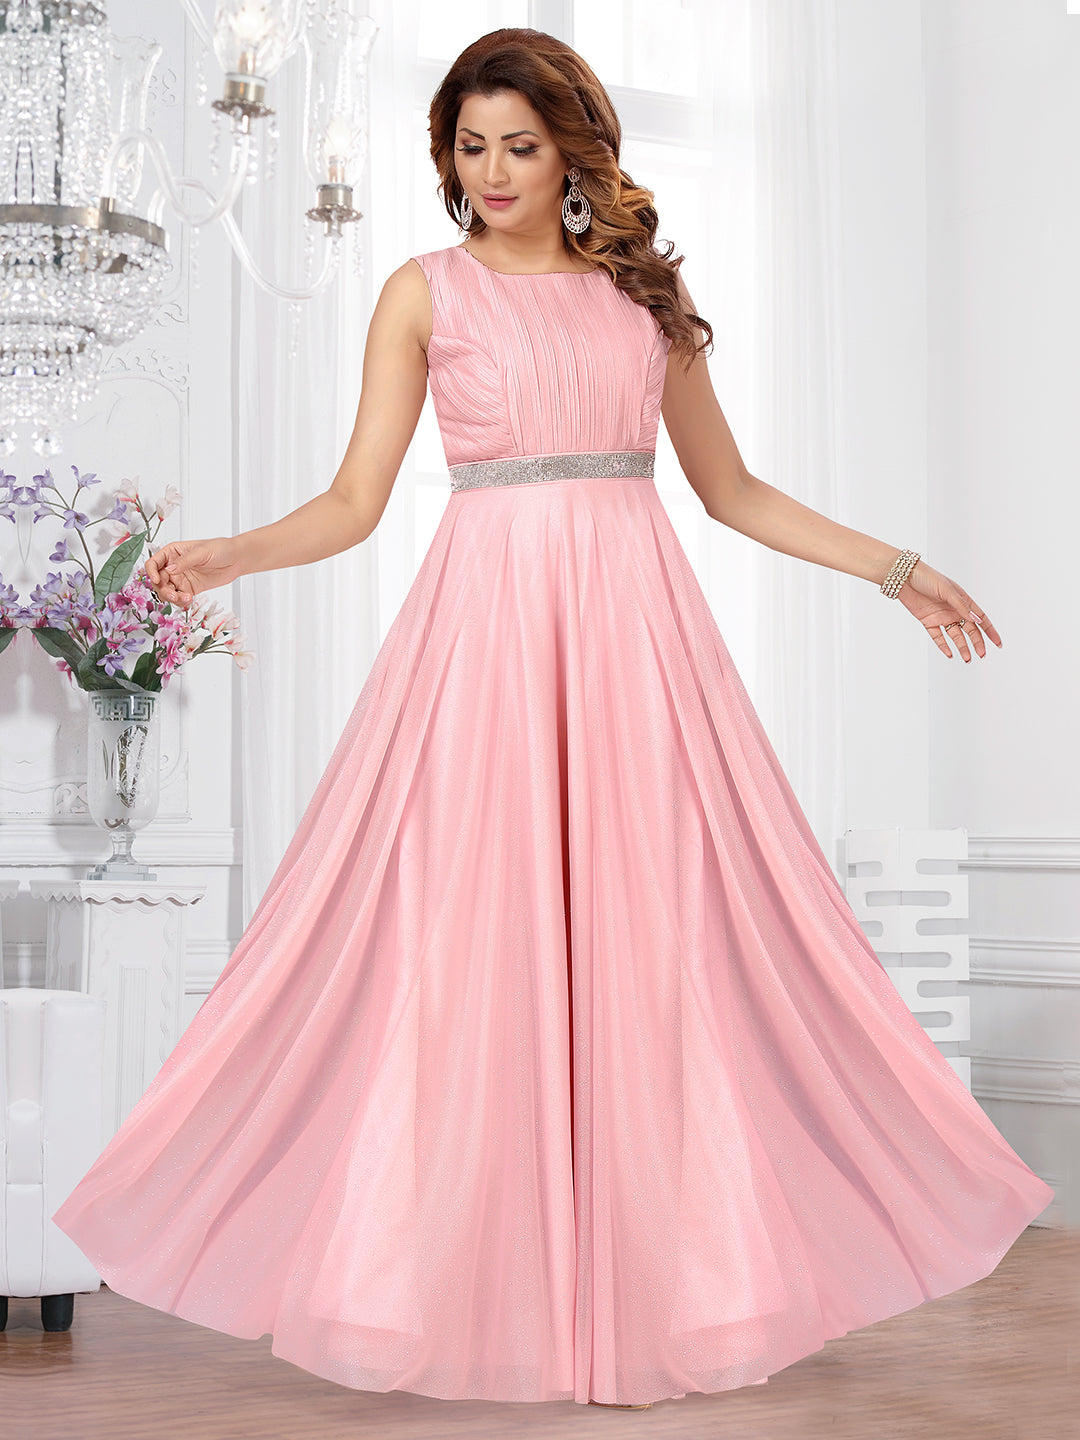 party gowns, wedding gowns, designer gowns, Indo-western gowns, and  floor-length gowns Gowns for women